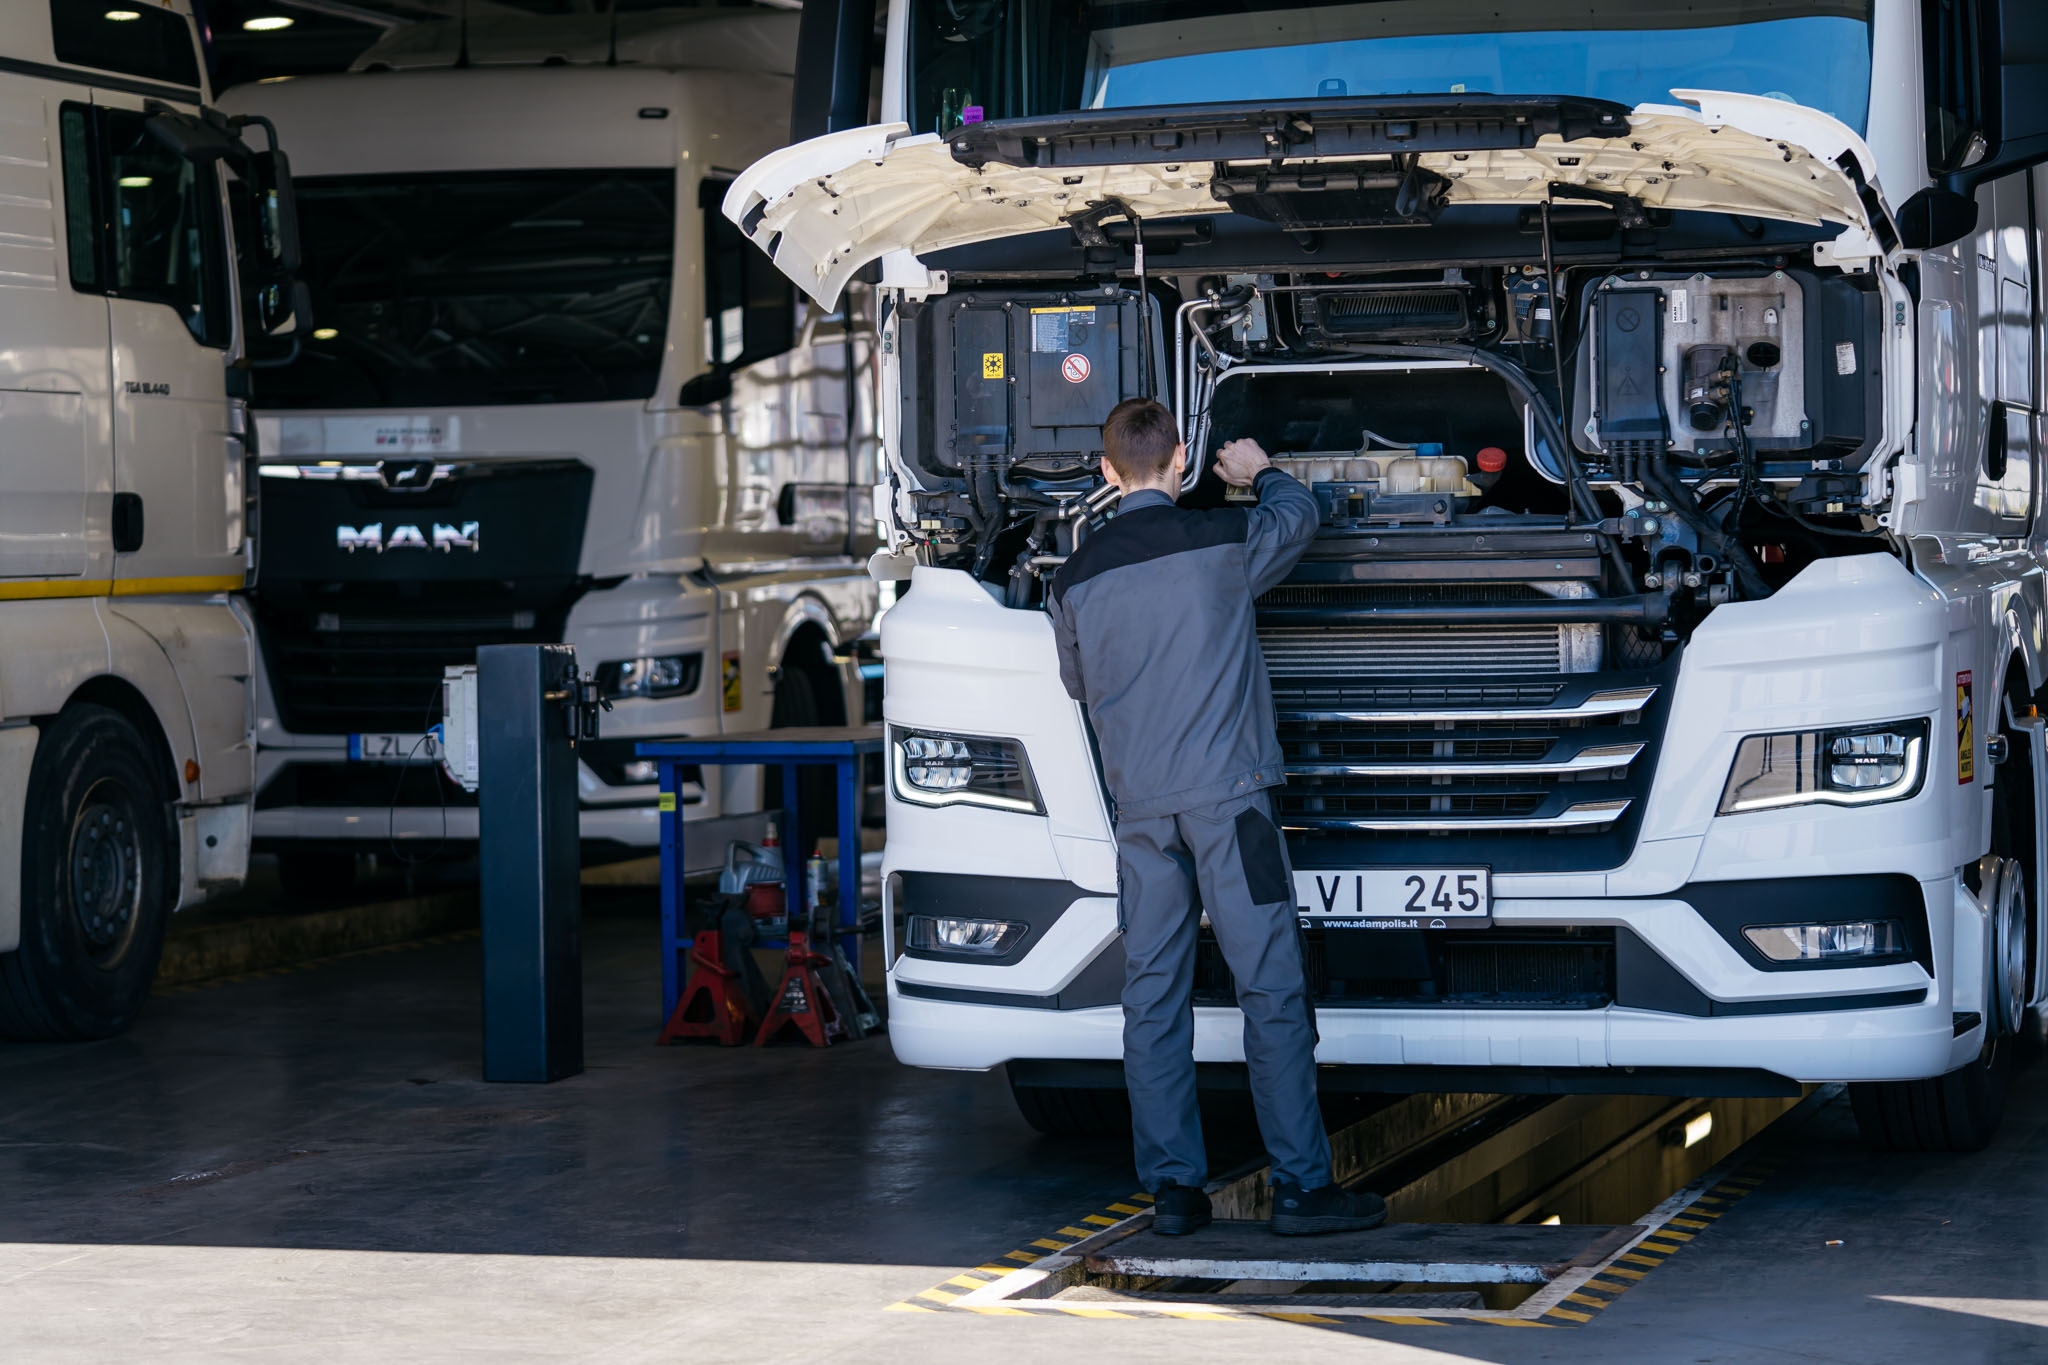 At the MAN Truck & Bus service in Marijampolė, we will perform minor truck repairs on the spot, without a queue!